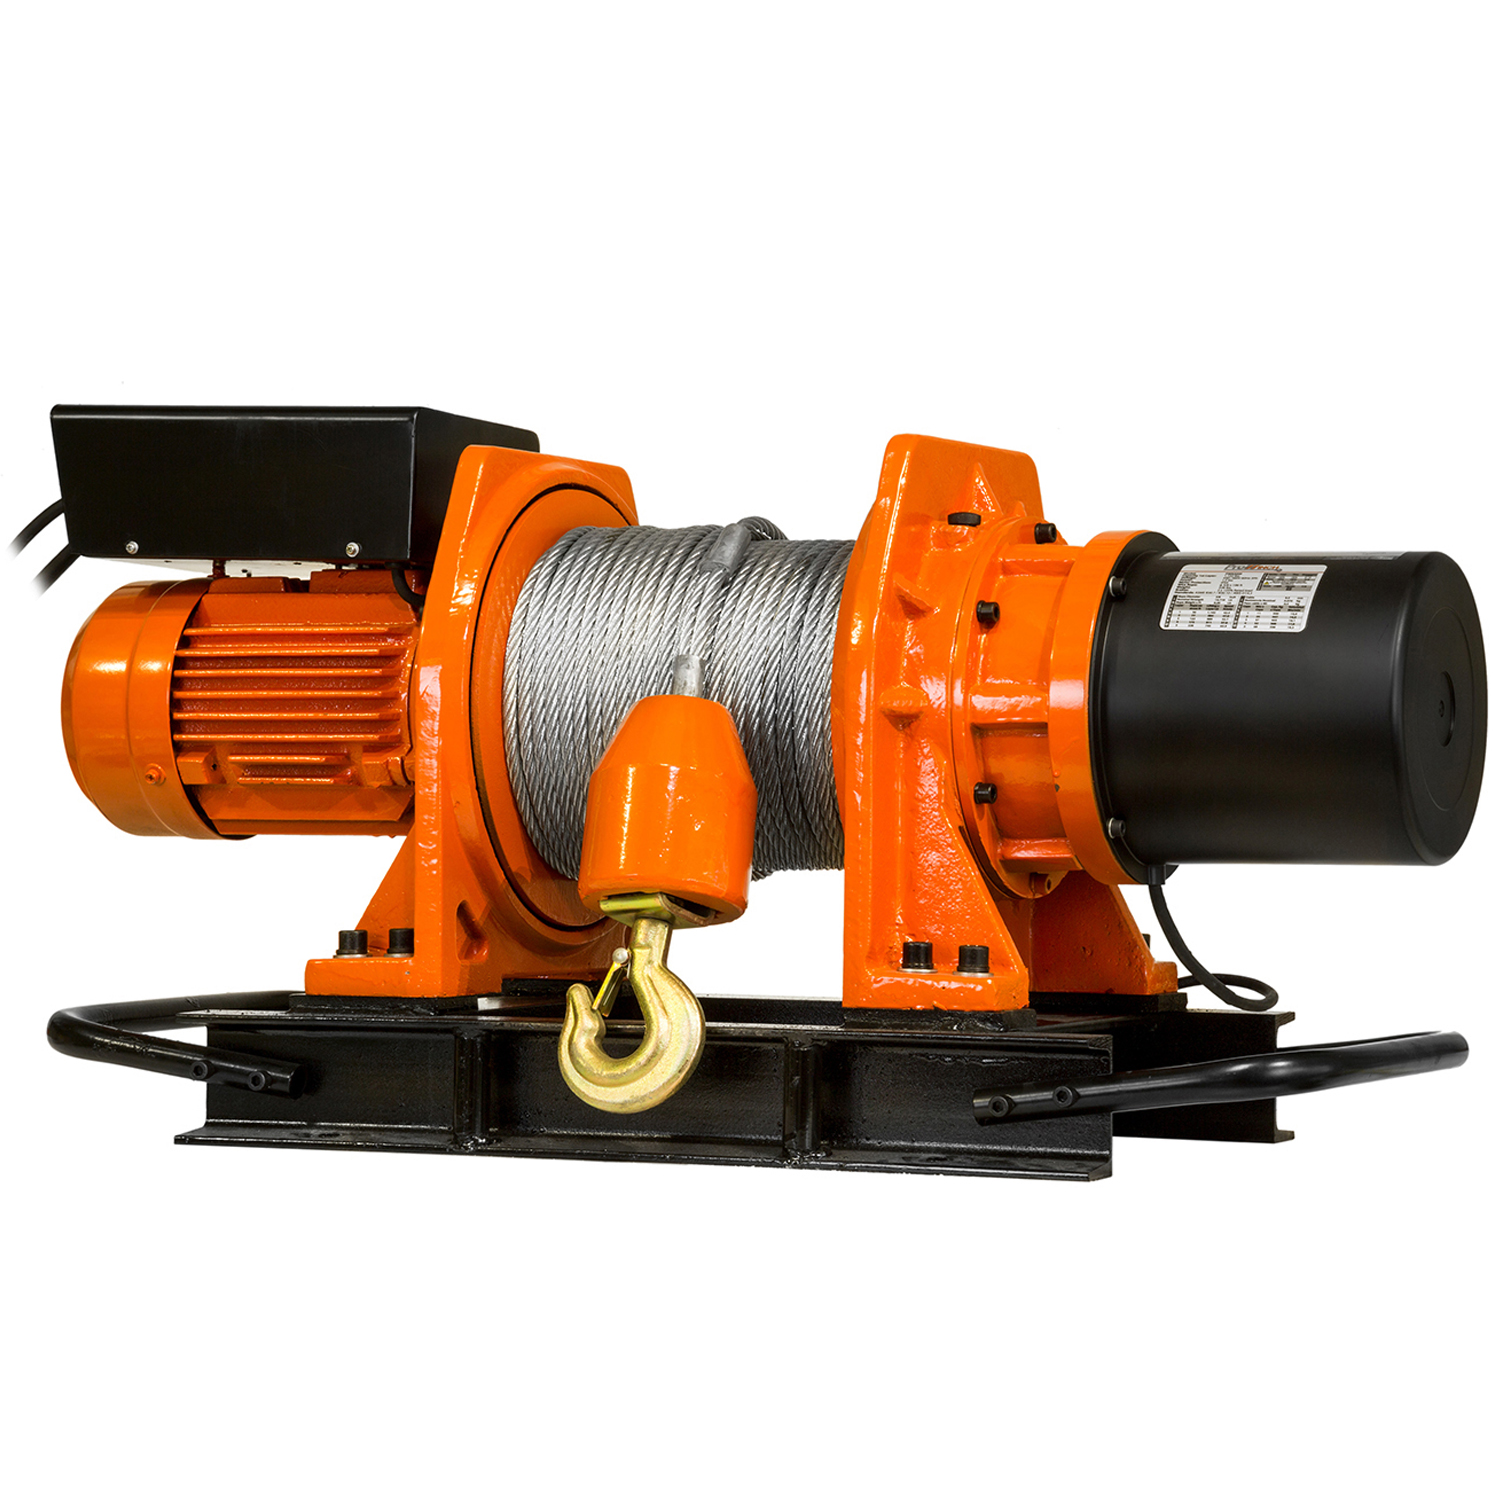 Prowinch 1/2 ton Industrial Electric Winch Heavy Duty with Wire Rope 220/240V